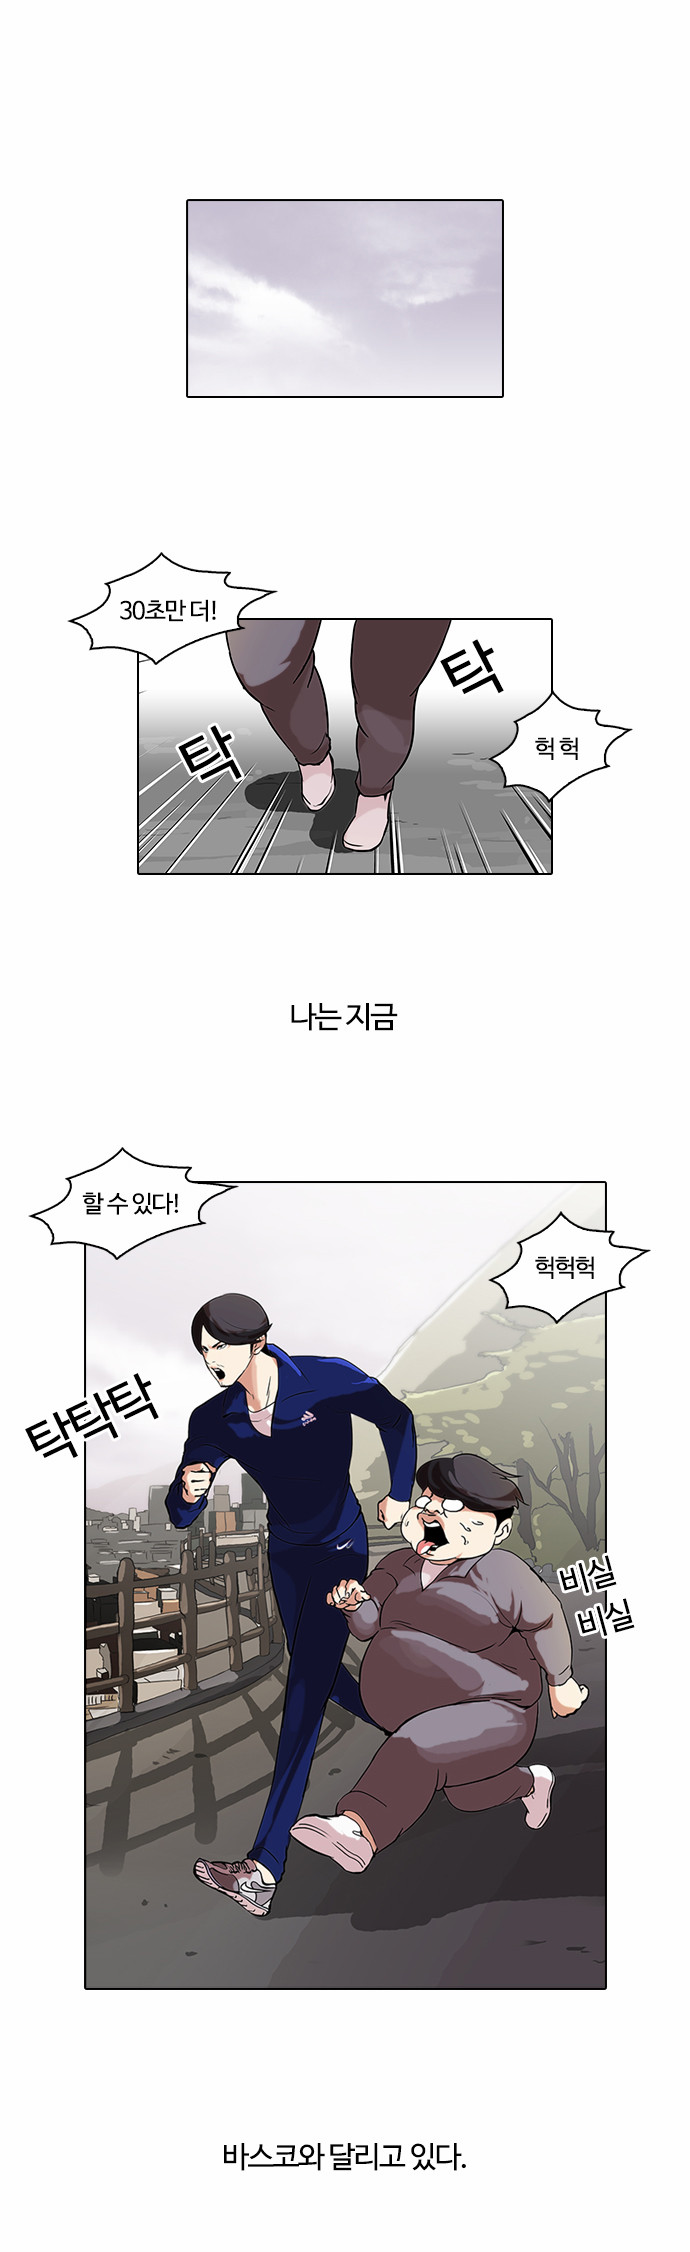 Lookism - Chapter 51 - Page 1